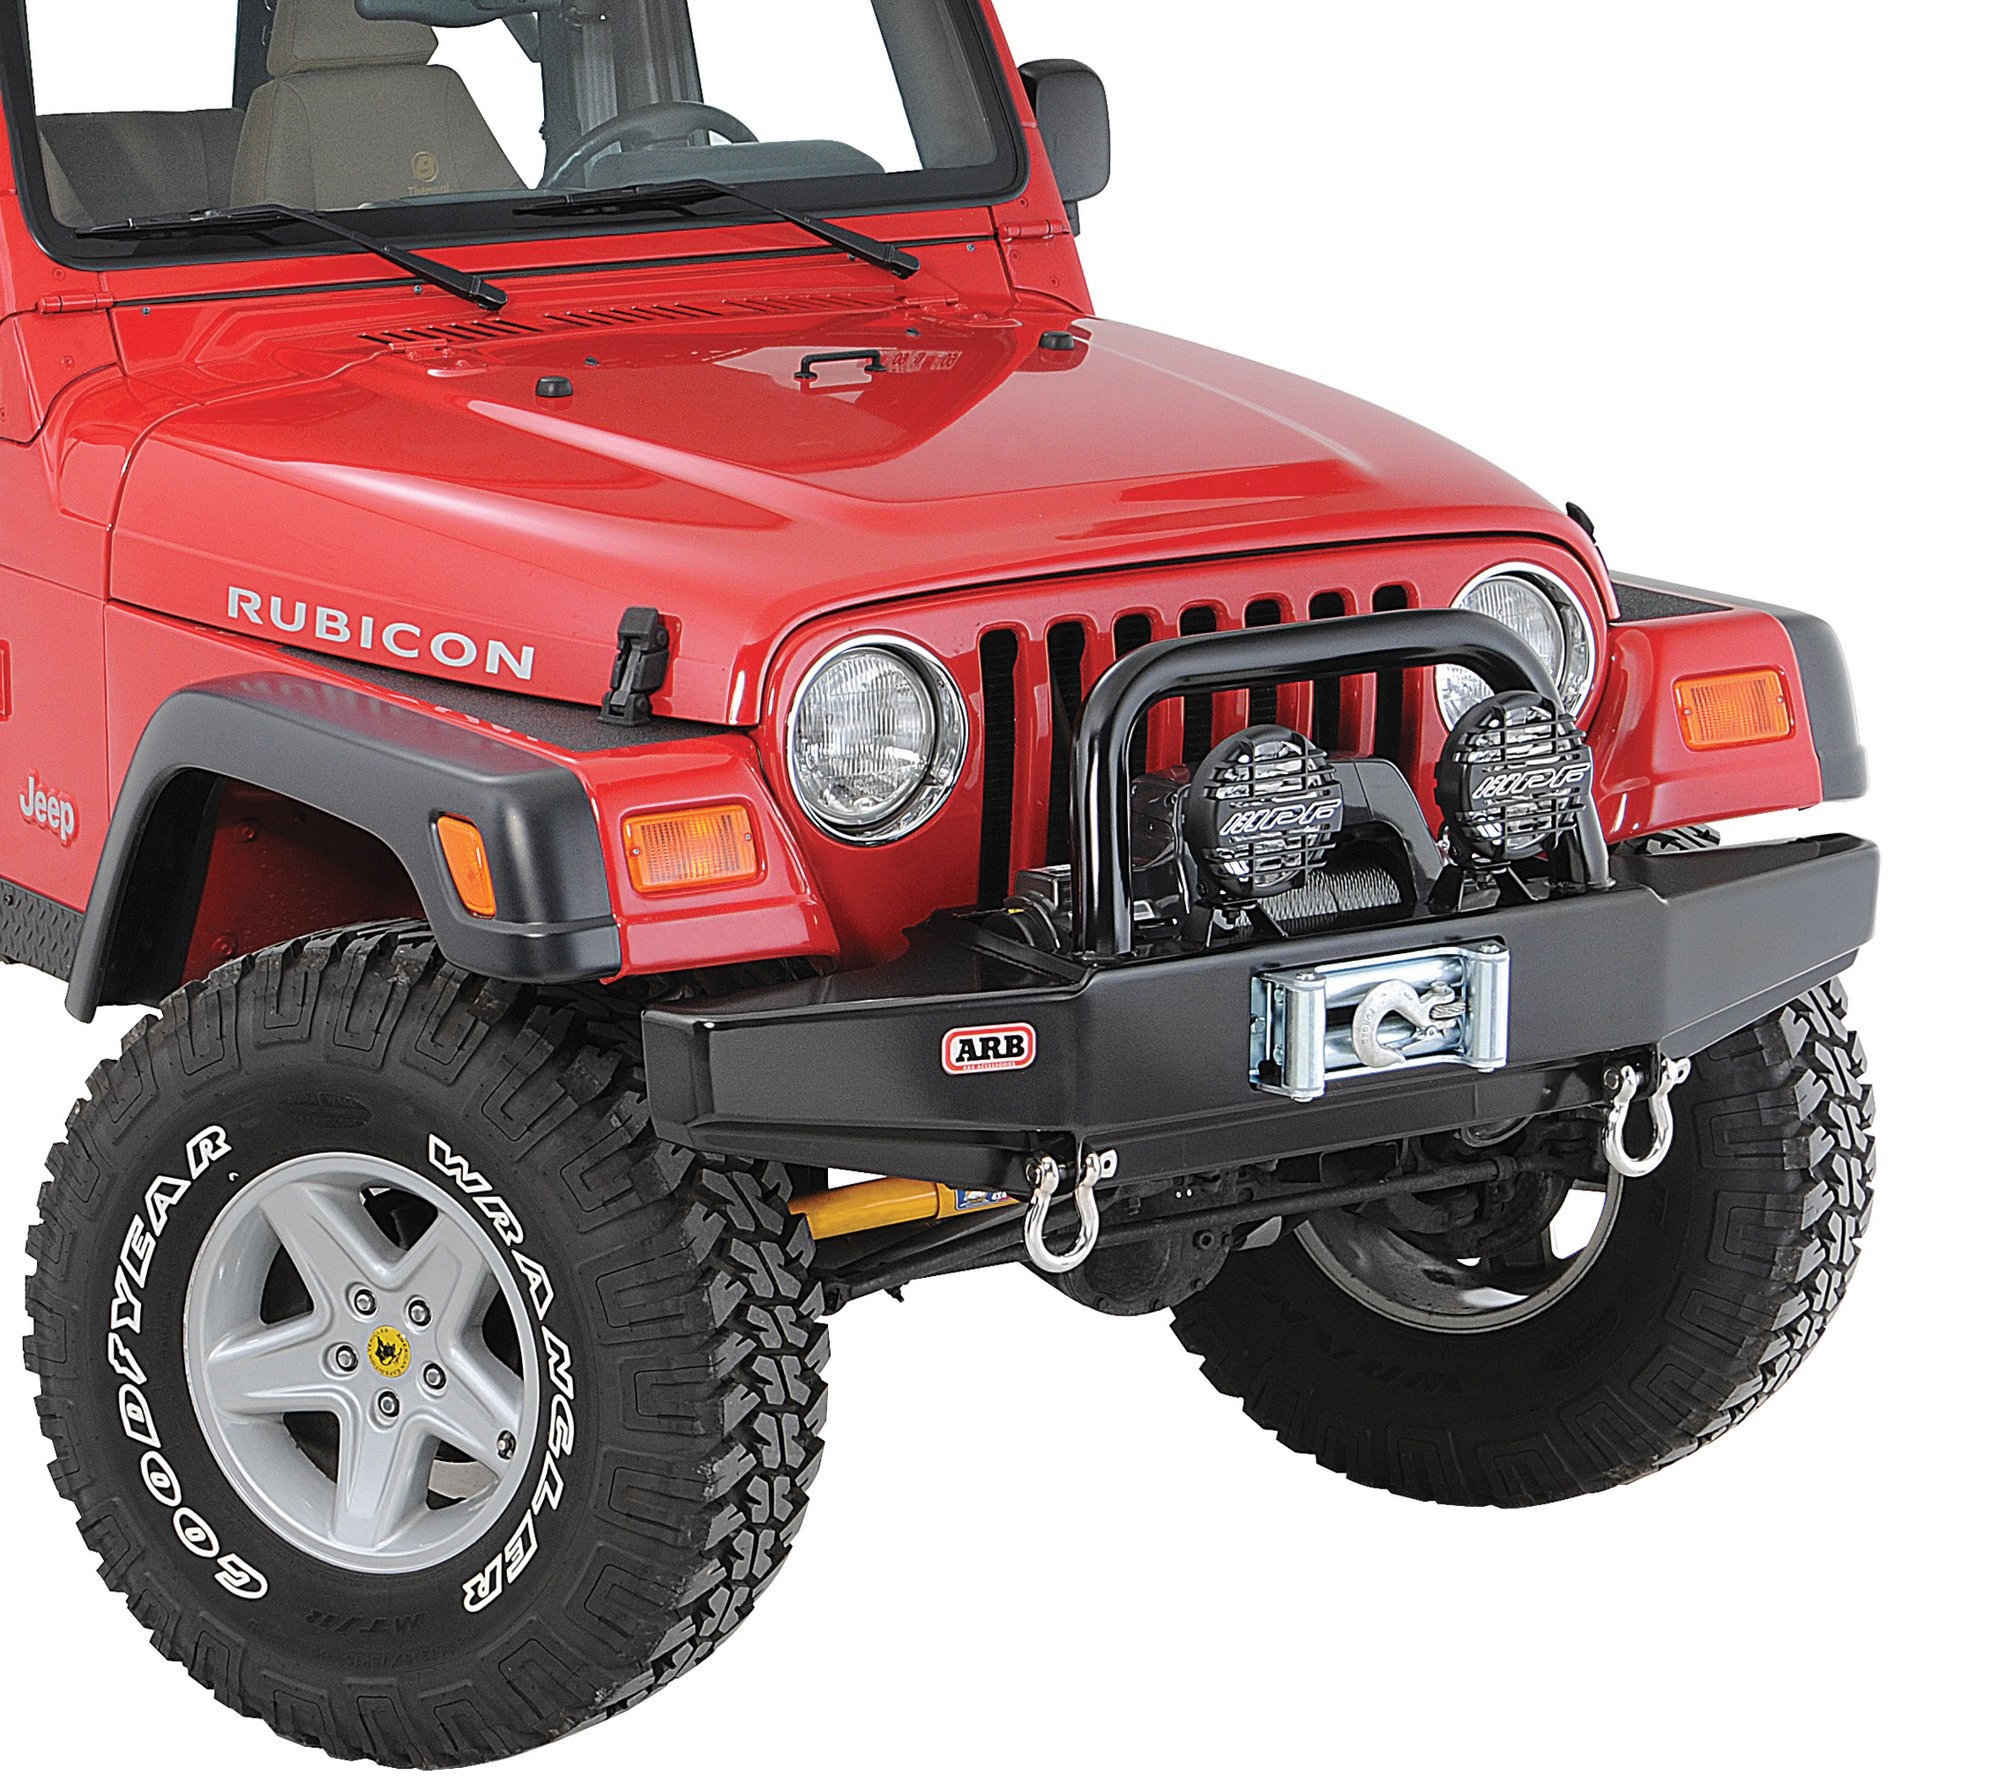 ARB Quadratec Edition Front Stubby Bull Bar Bumper for 87 06 Jeep Wrangler YJ TJ & Unlimited